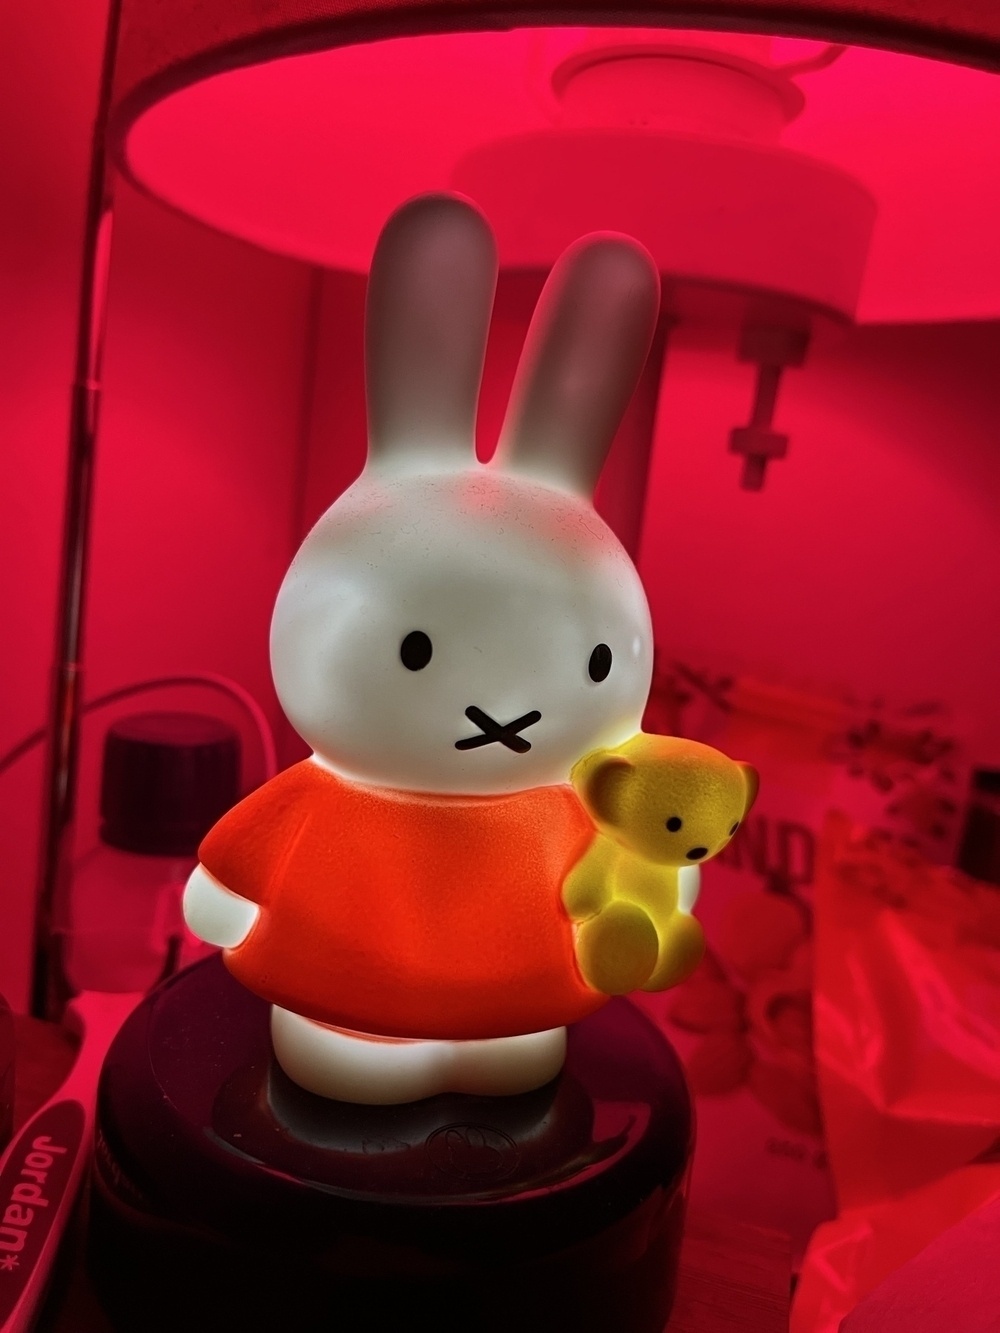 A night stand lamp with red light, Miffy the rabbit night light, and some clutter.